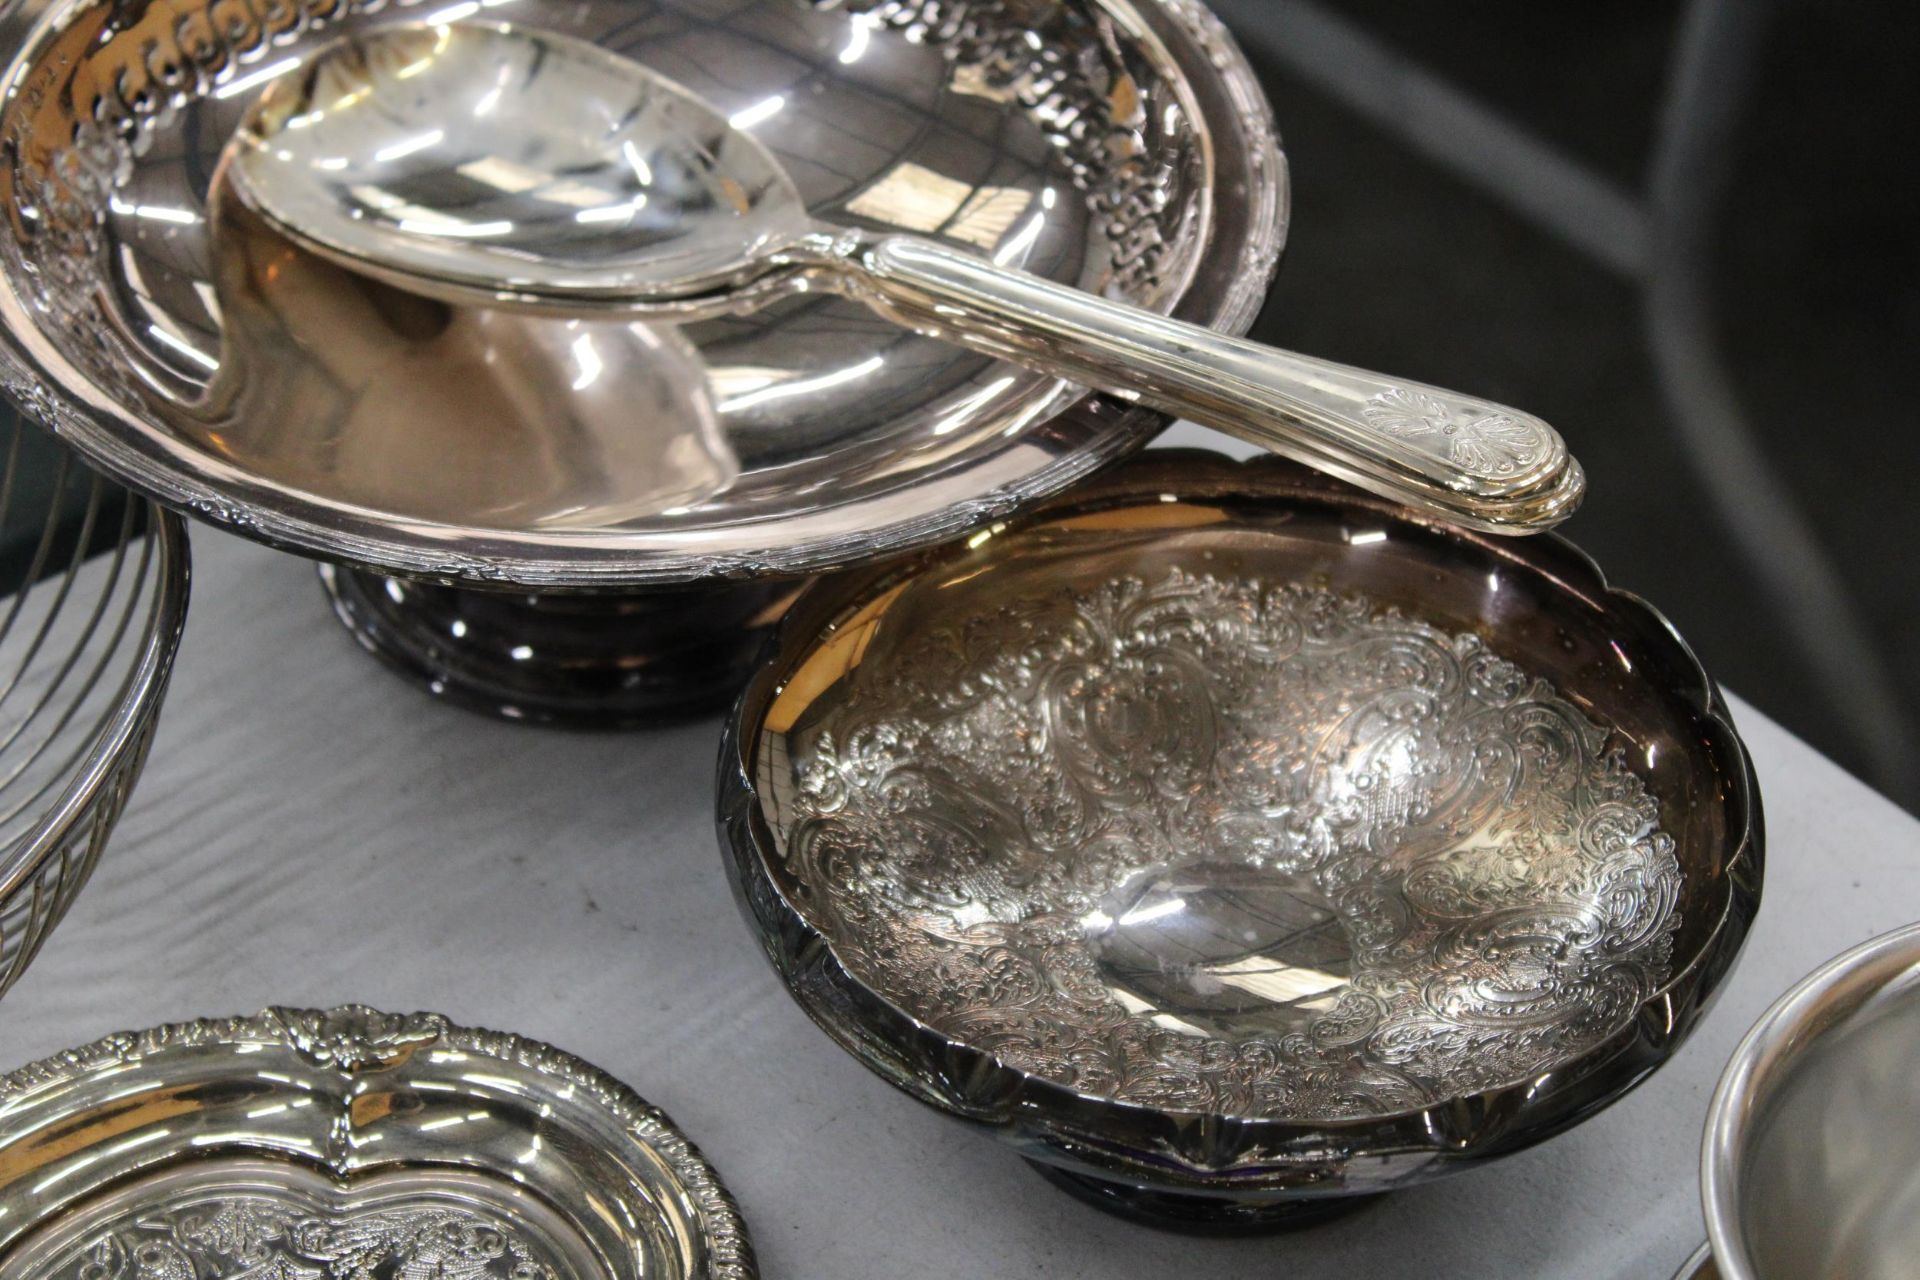 A QUANTITY OF SILVER A CRUET SET, TRAY, SALAD SERVERS, ETCPLATED ITEMS TO INCLUDE BOWLS, - Image 4 of 5